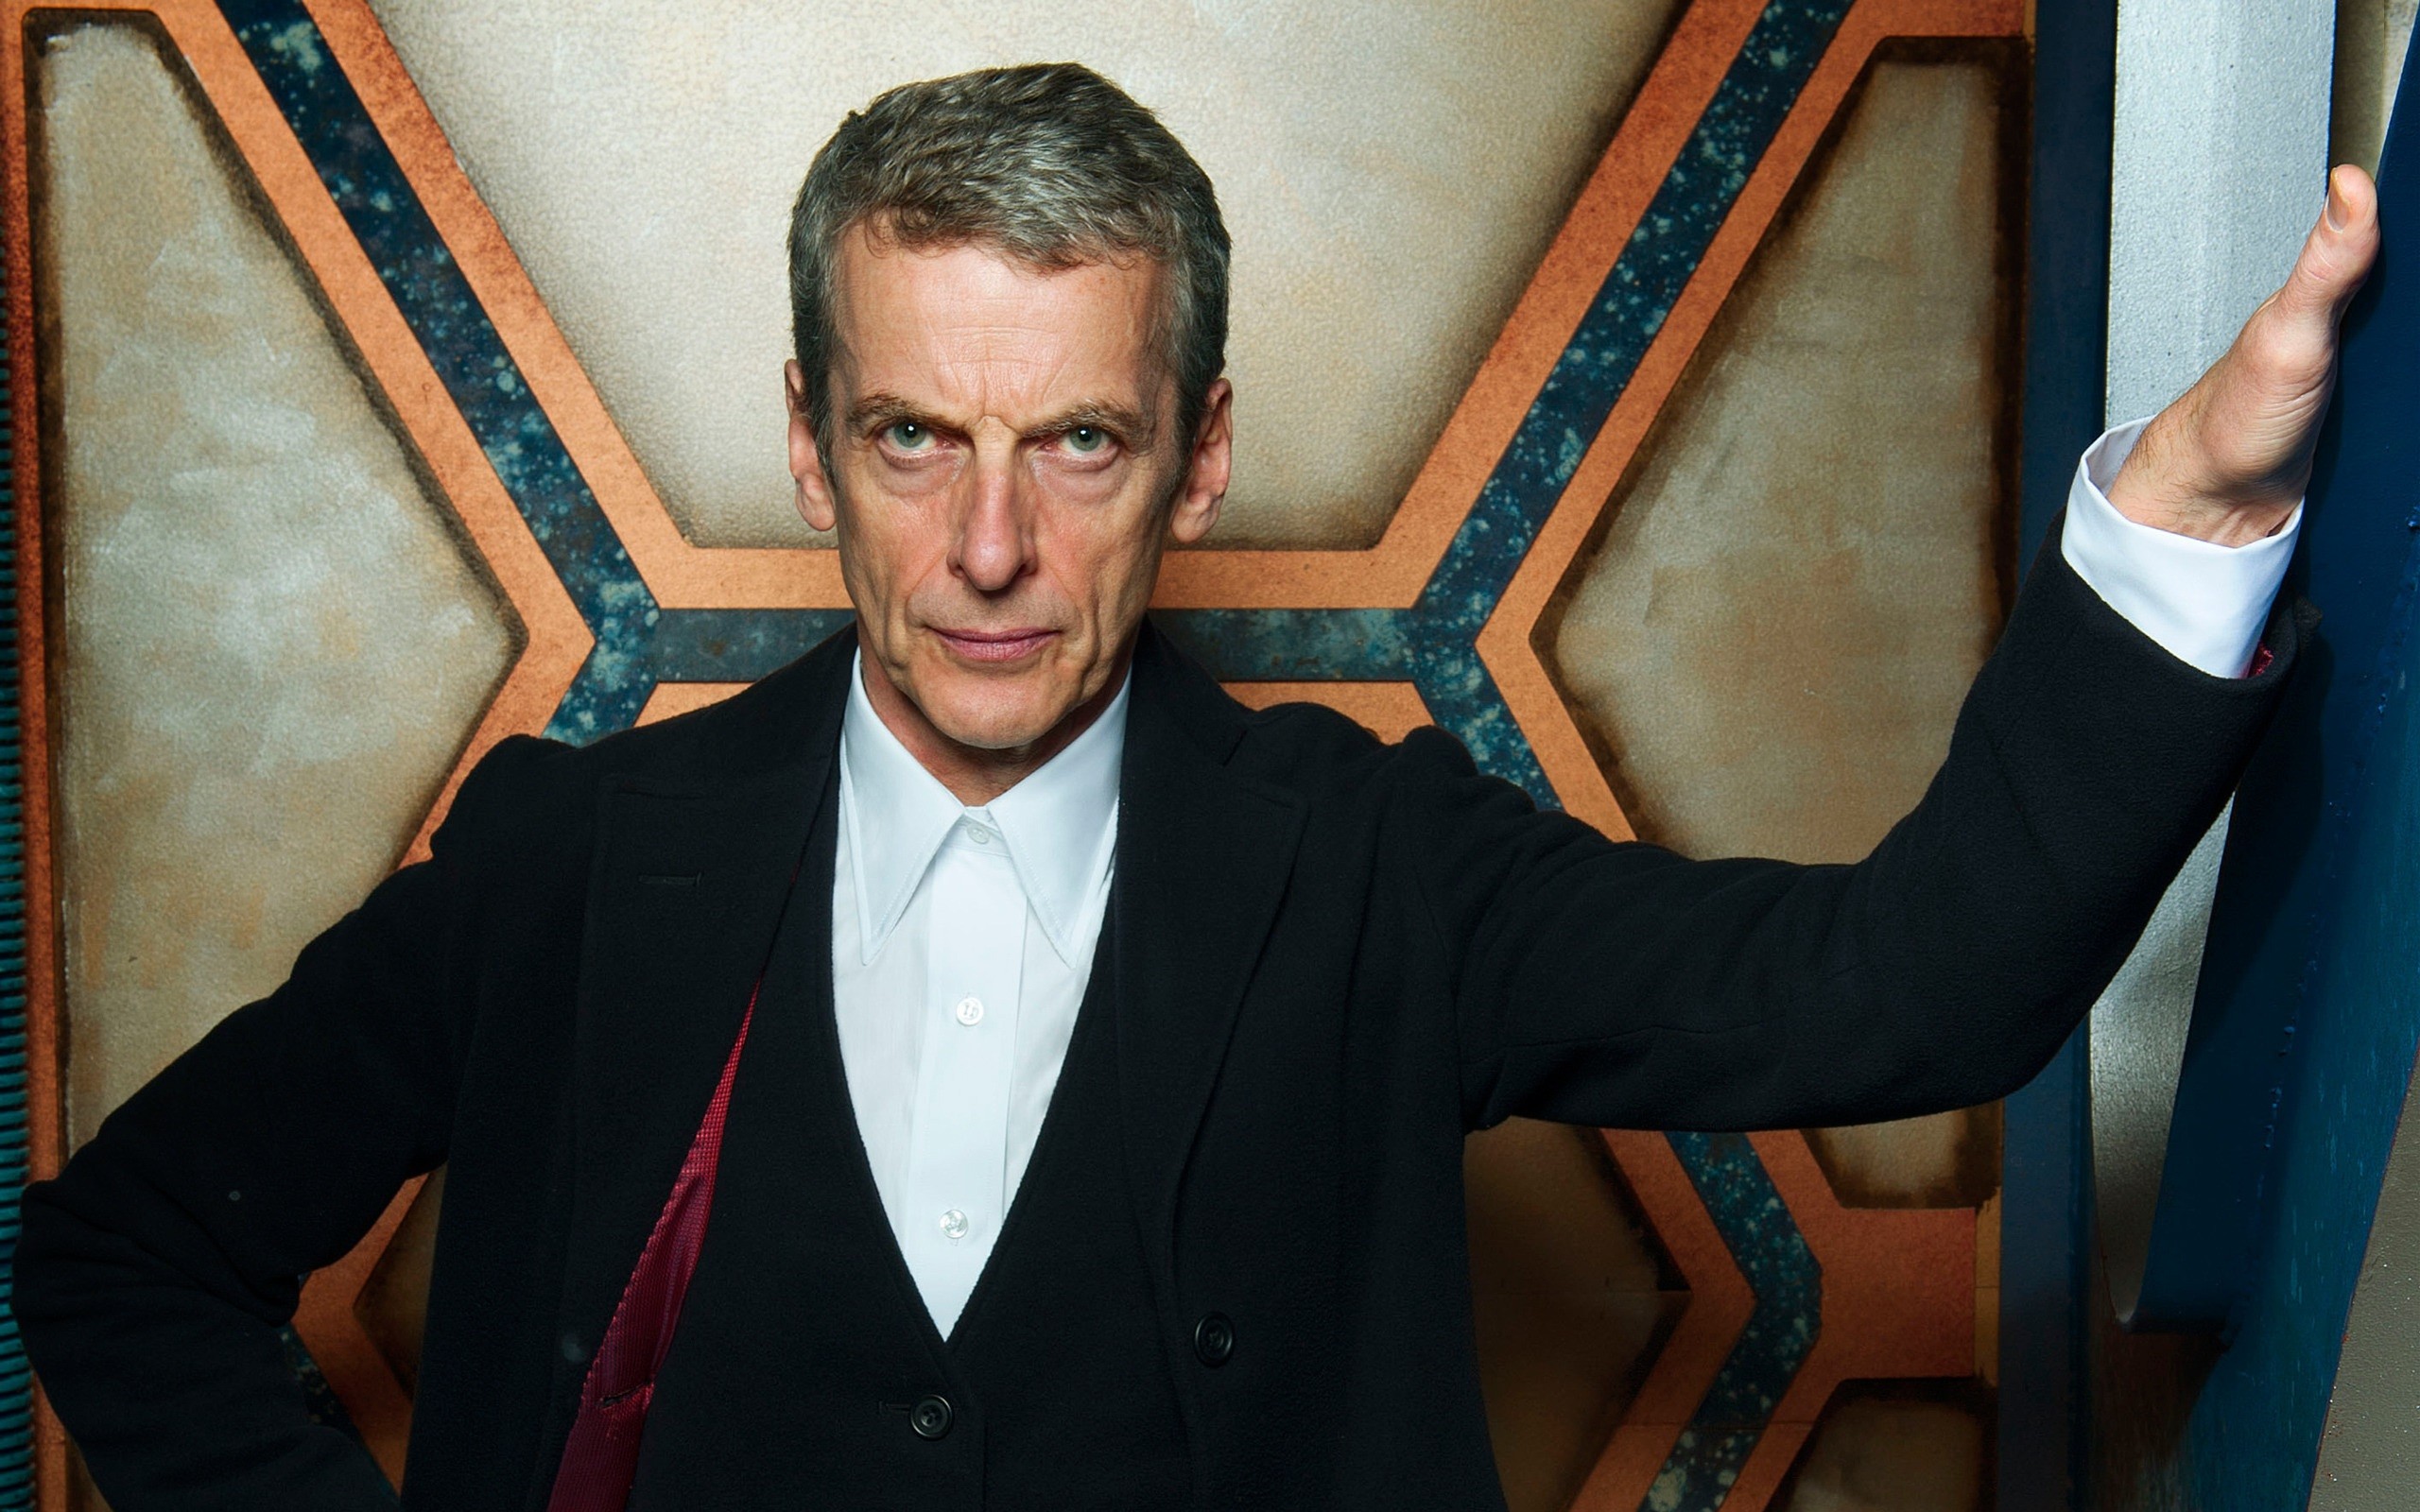 Doctor Who The Doctor TARDiS Peter Capaldi TV Actor Science Fiction BBC 2560x1600